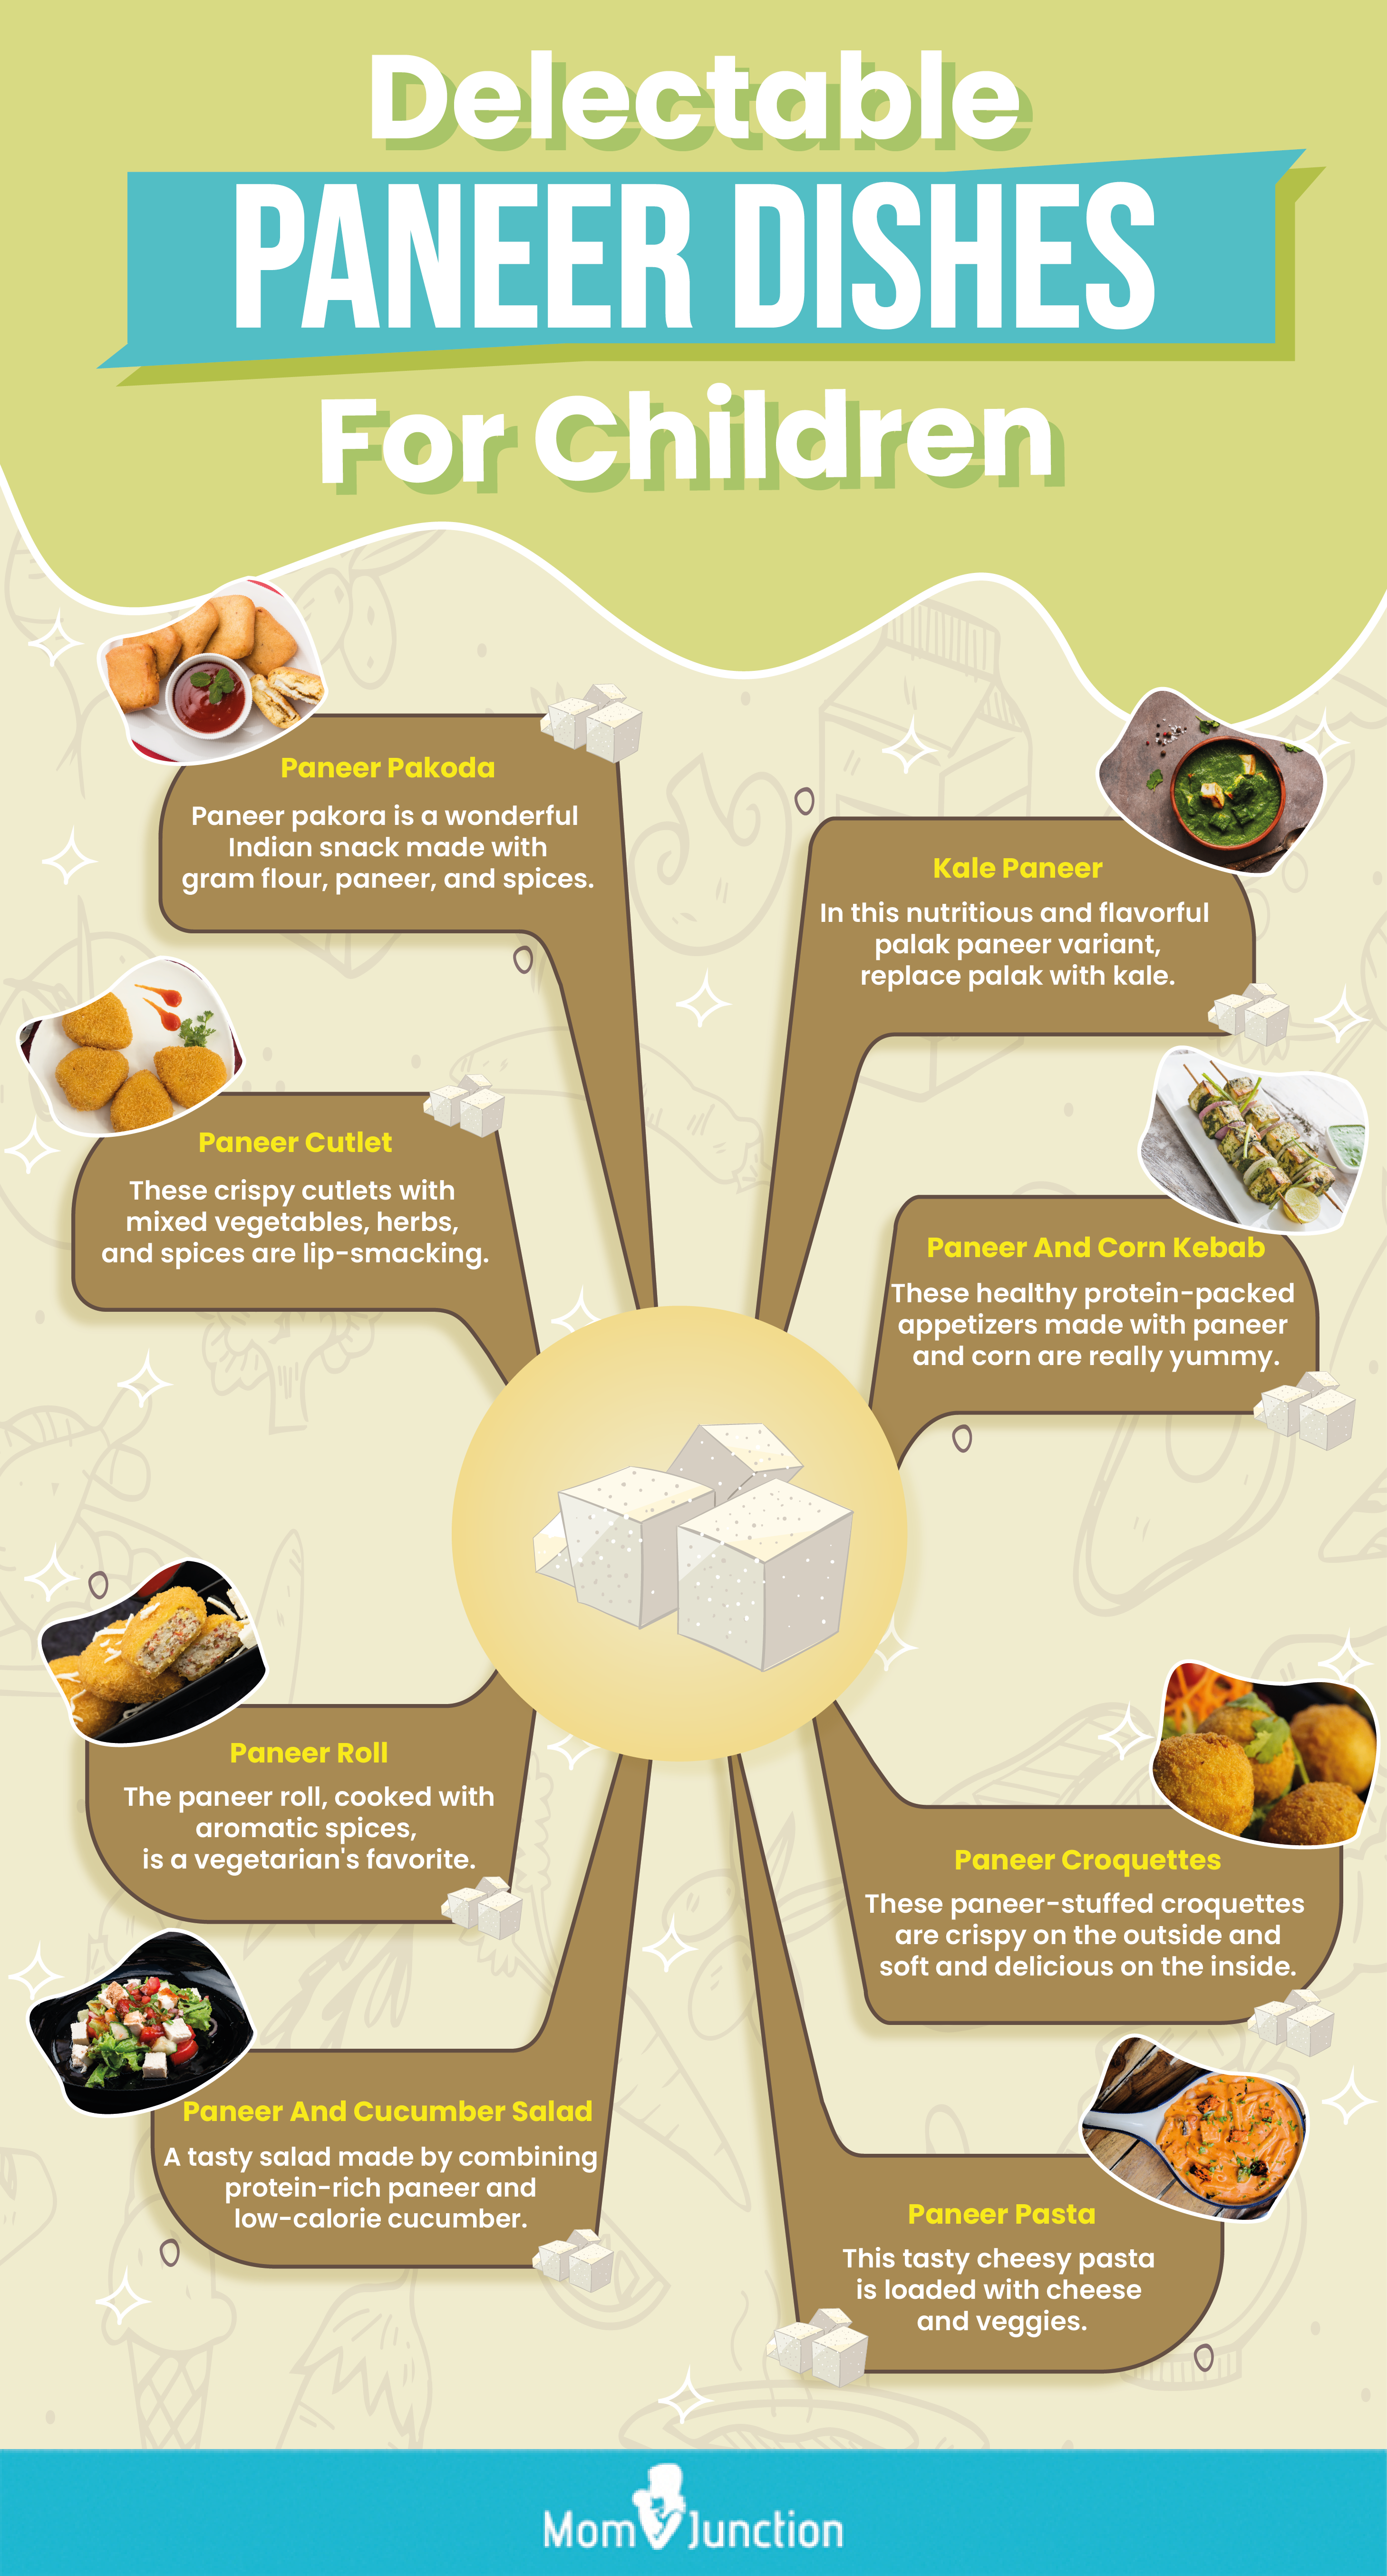 delectable paneer dishes for children (infographic)